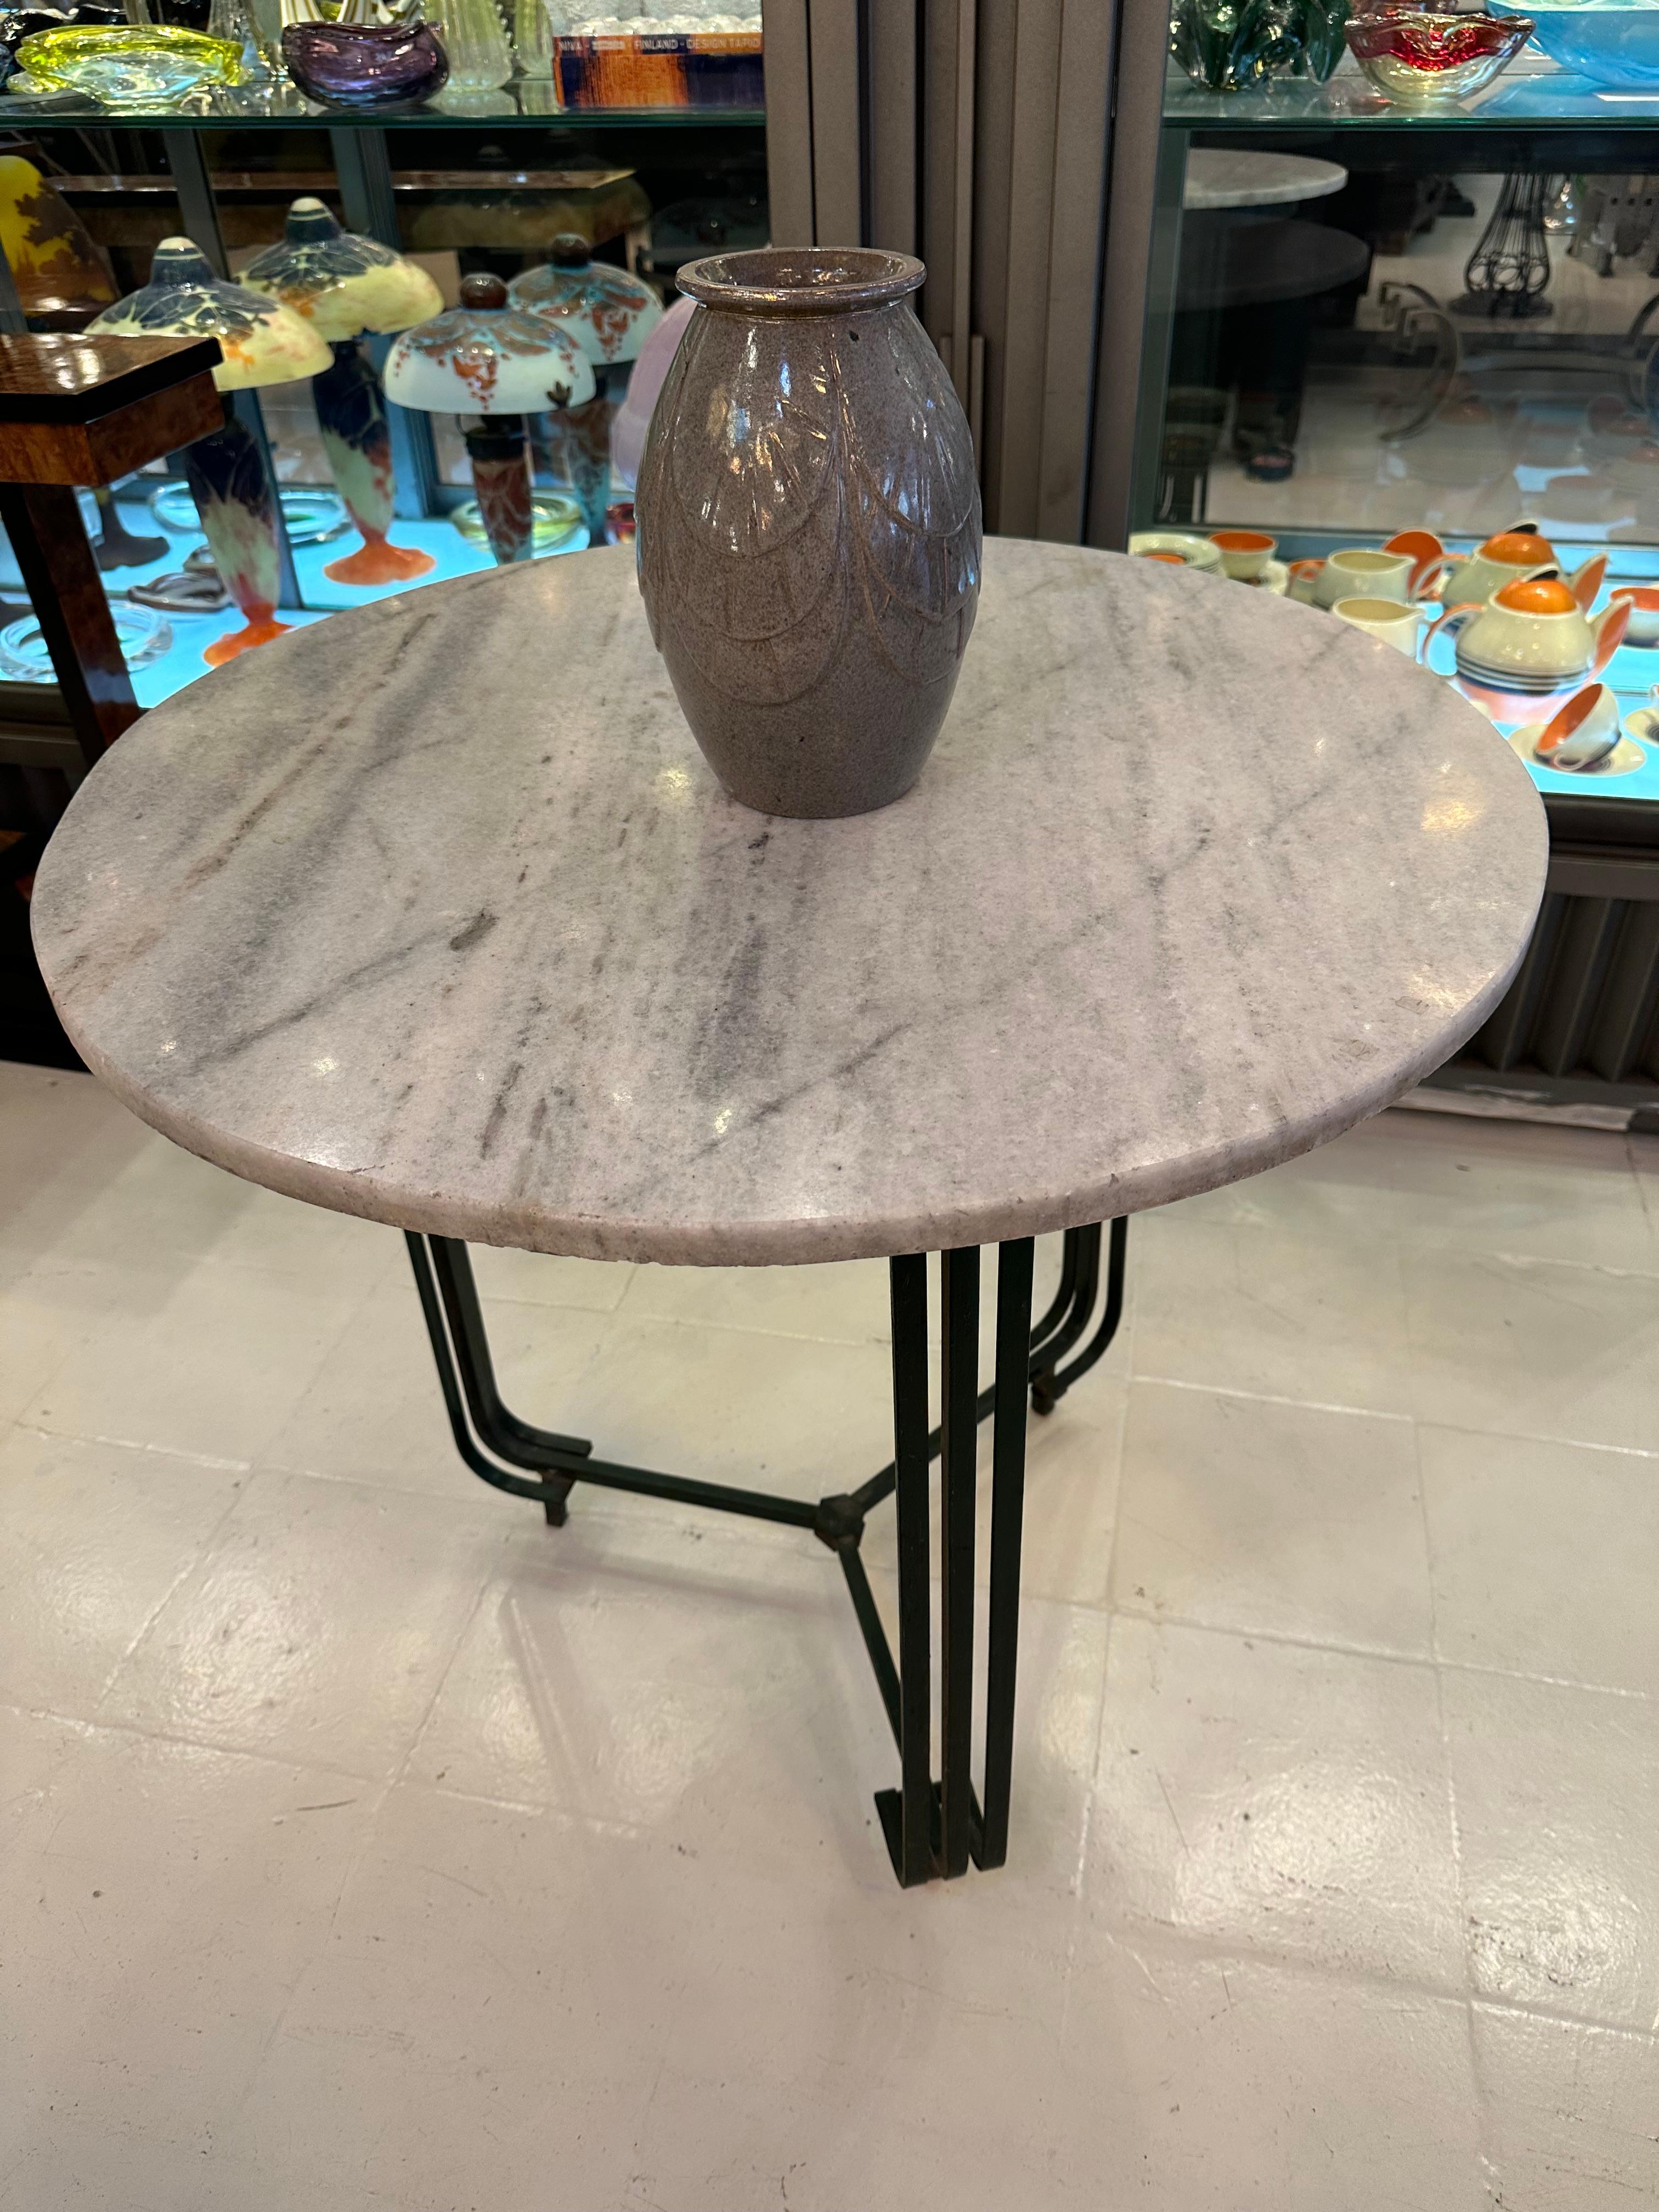 Sign: Made in France
We have specialized in the sale of Art Deco and Art Nouveau and Vintage styles since 1982. If you have any questions we are at your disposal.
Pushing the button that reads 'View All From Seller'. And you can see more objects to